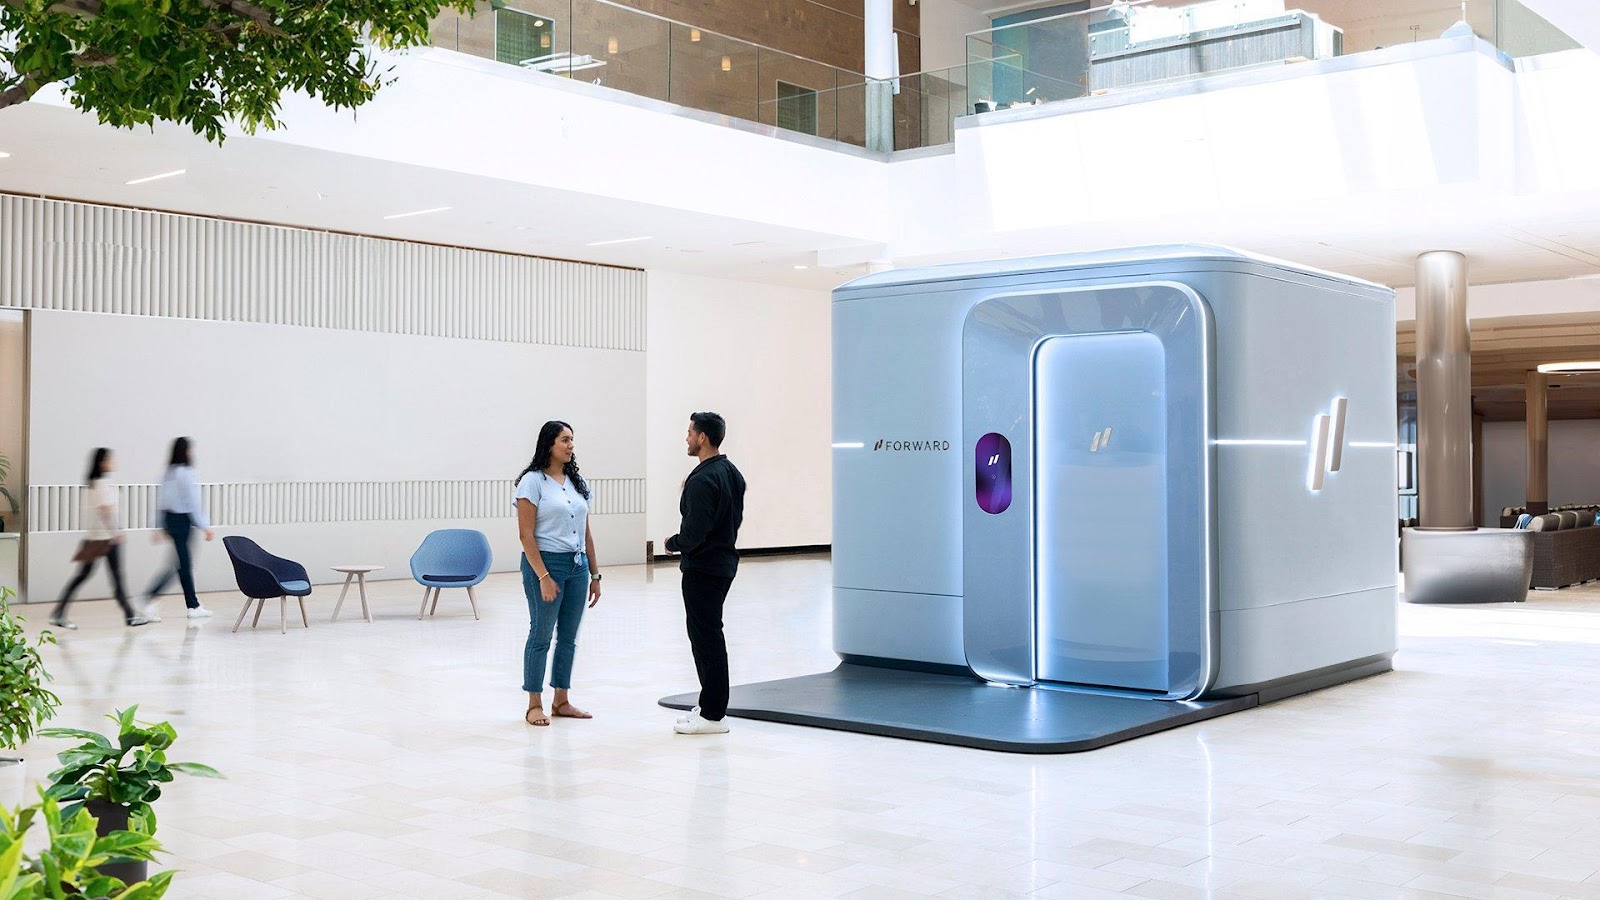 Forward nabs $100M, rolls out CarePods as self-serve clinics